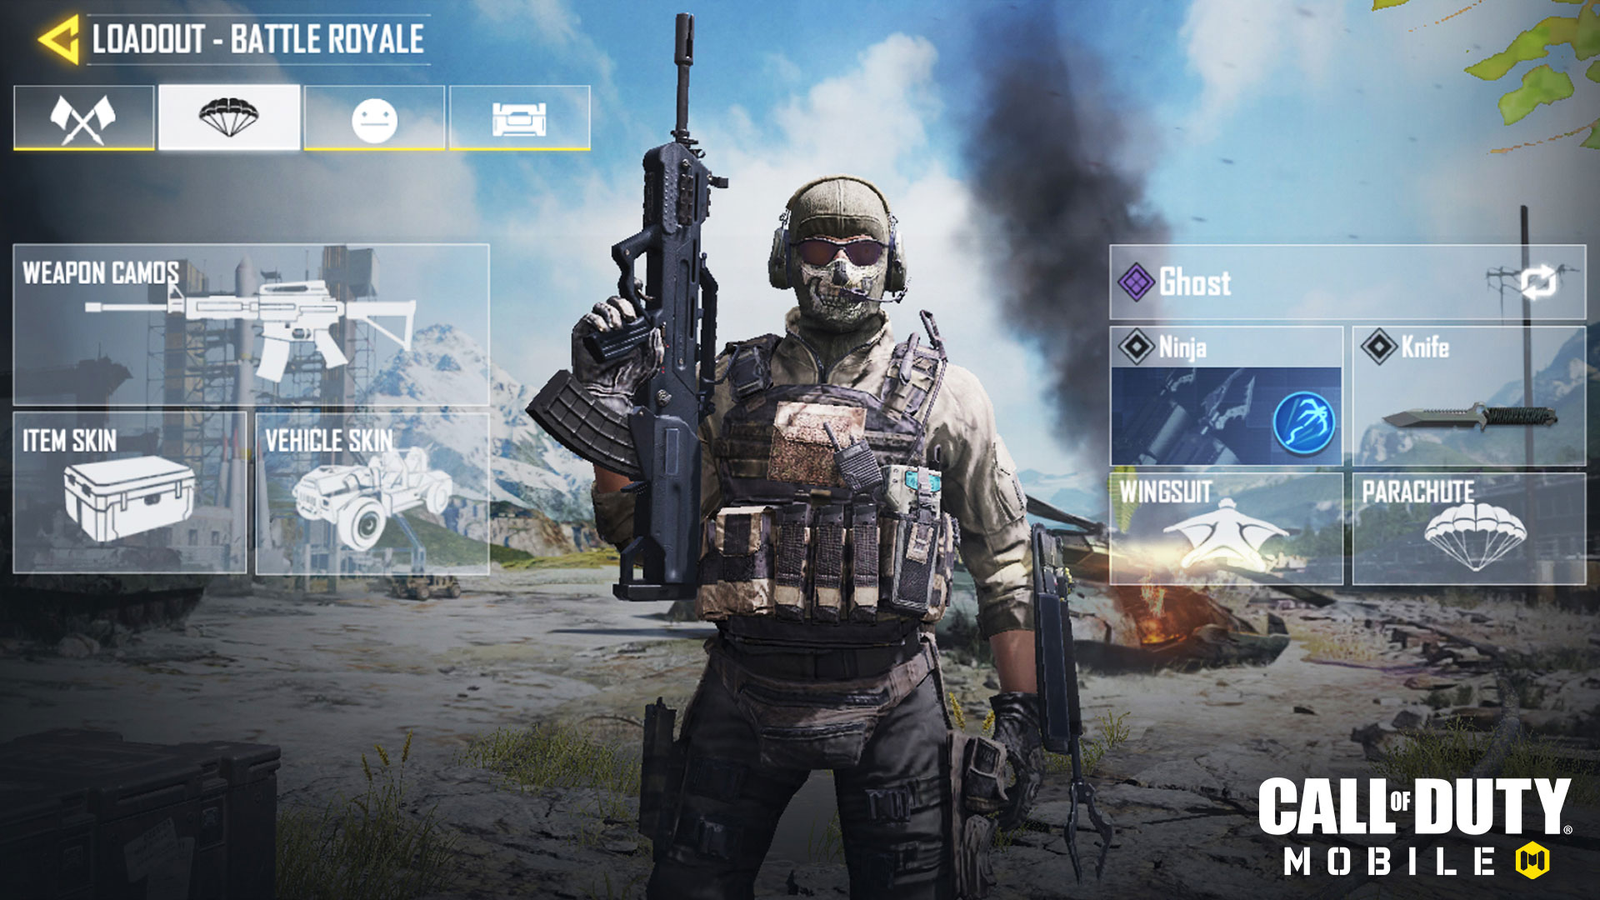 Call of Duty Mobile guide: loadouts, maps, modes, characters, and